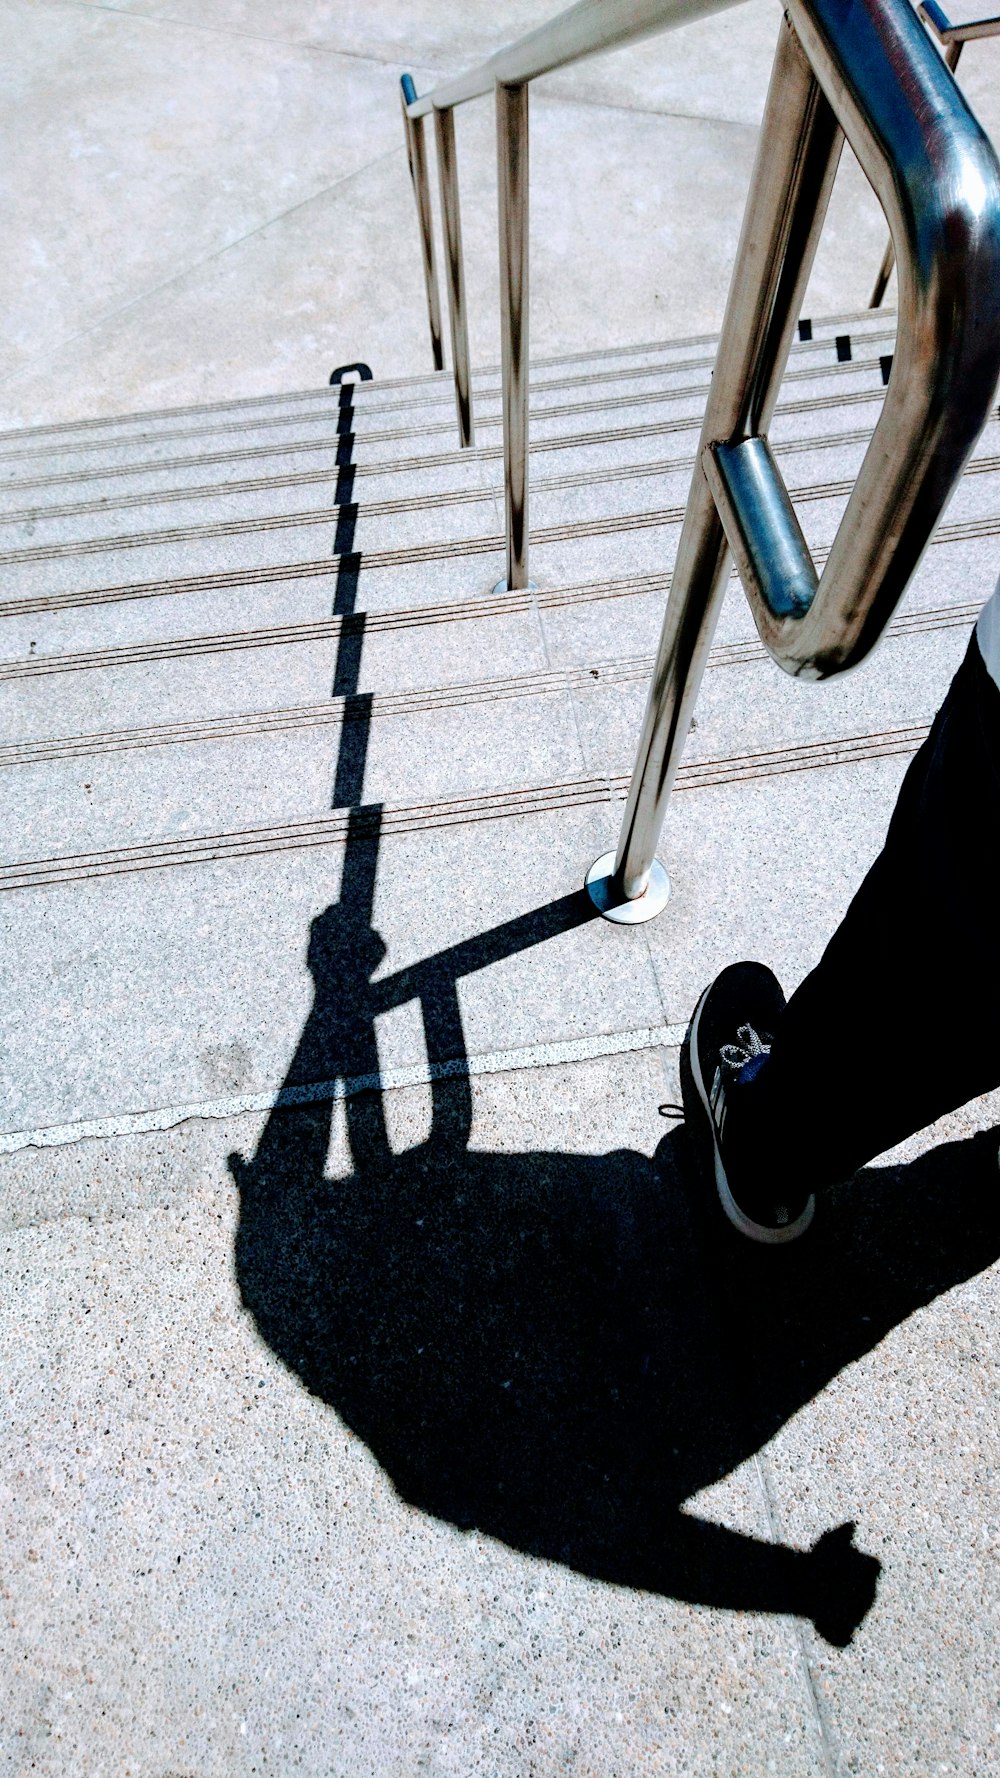 shadow of a person standing on staircase